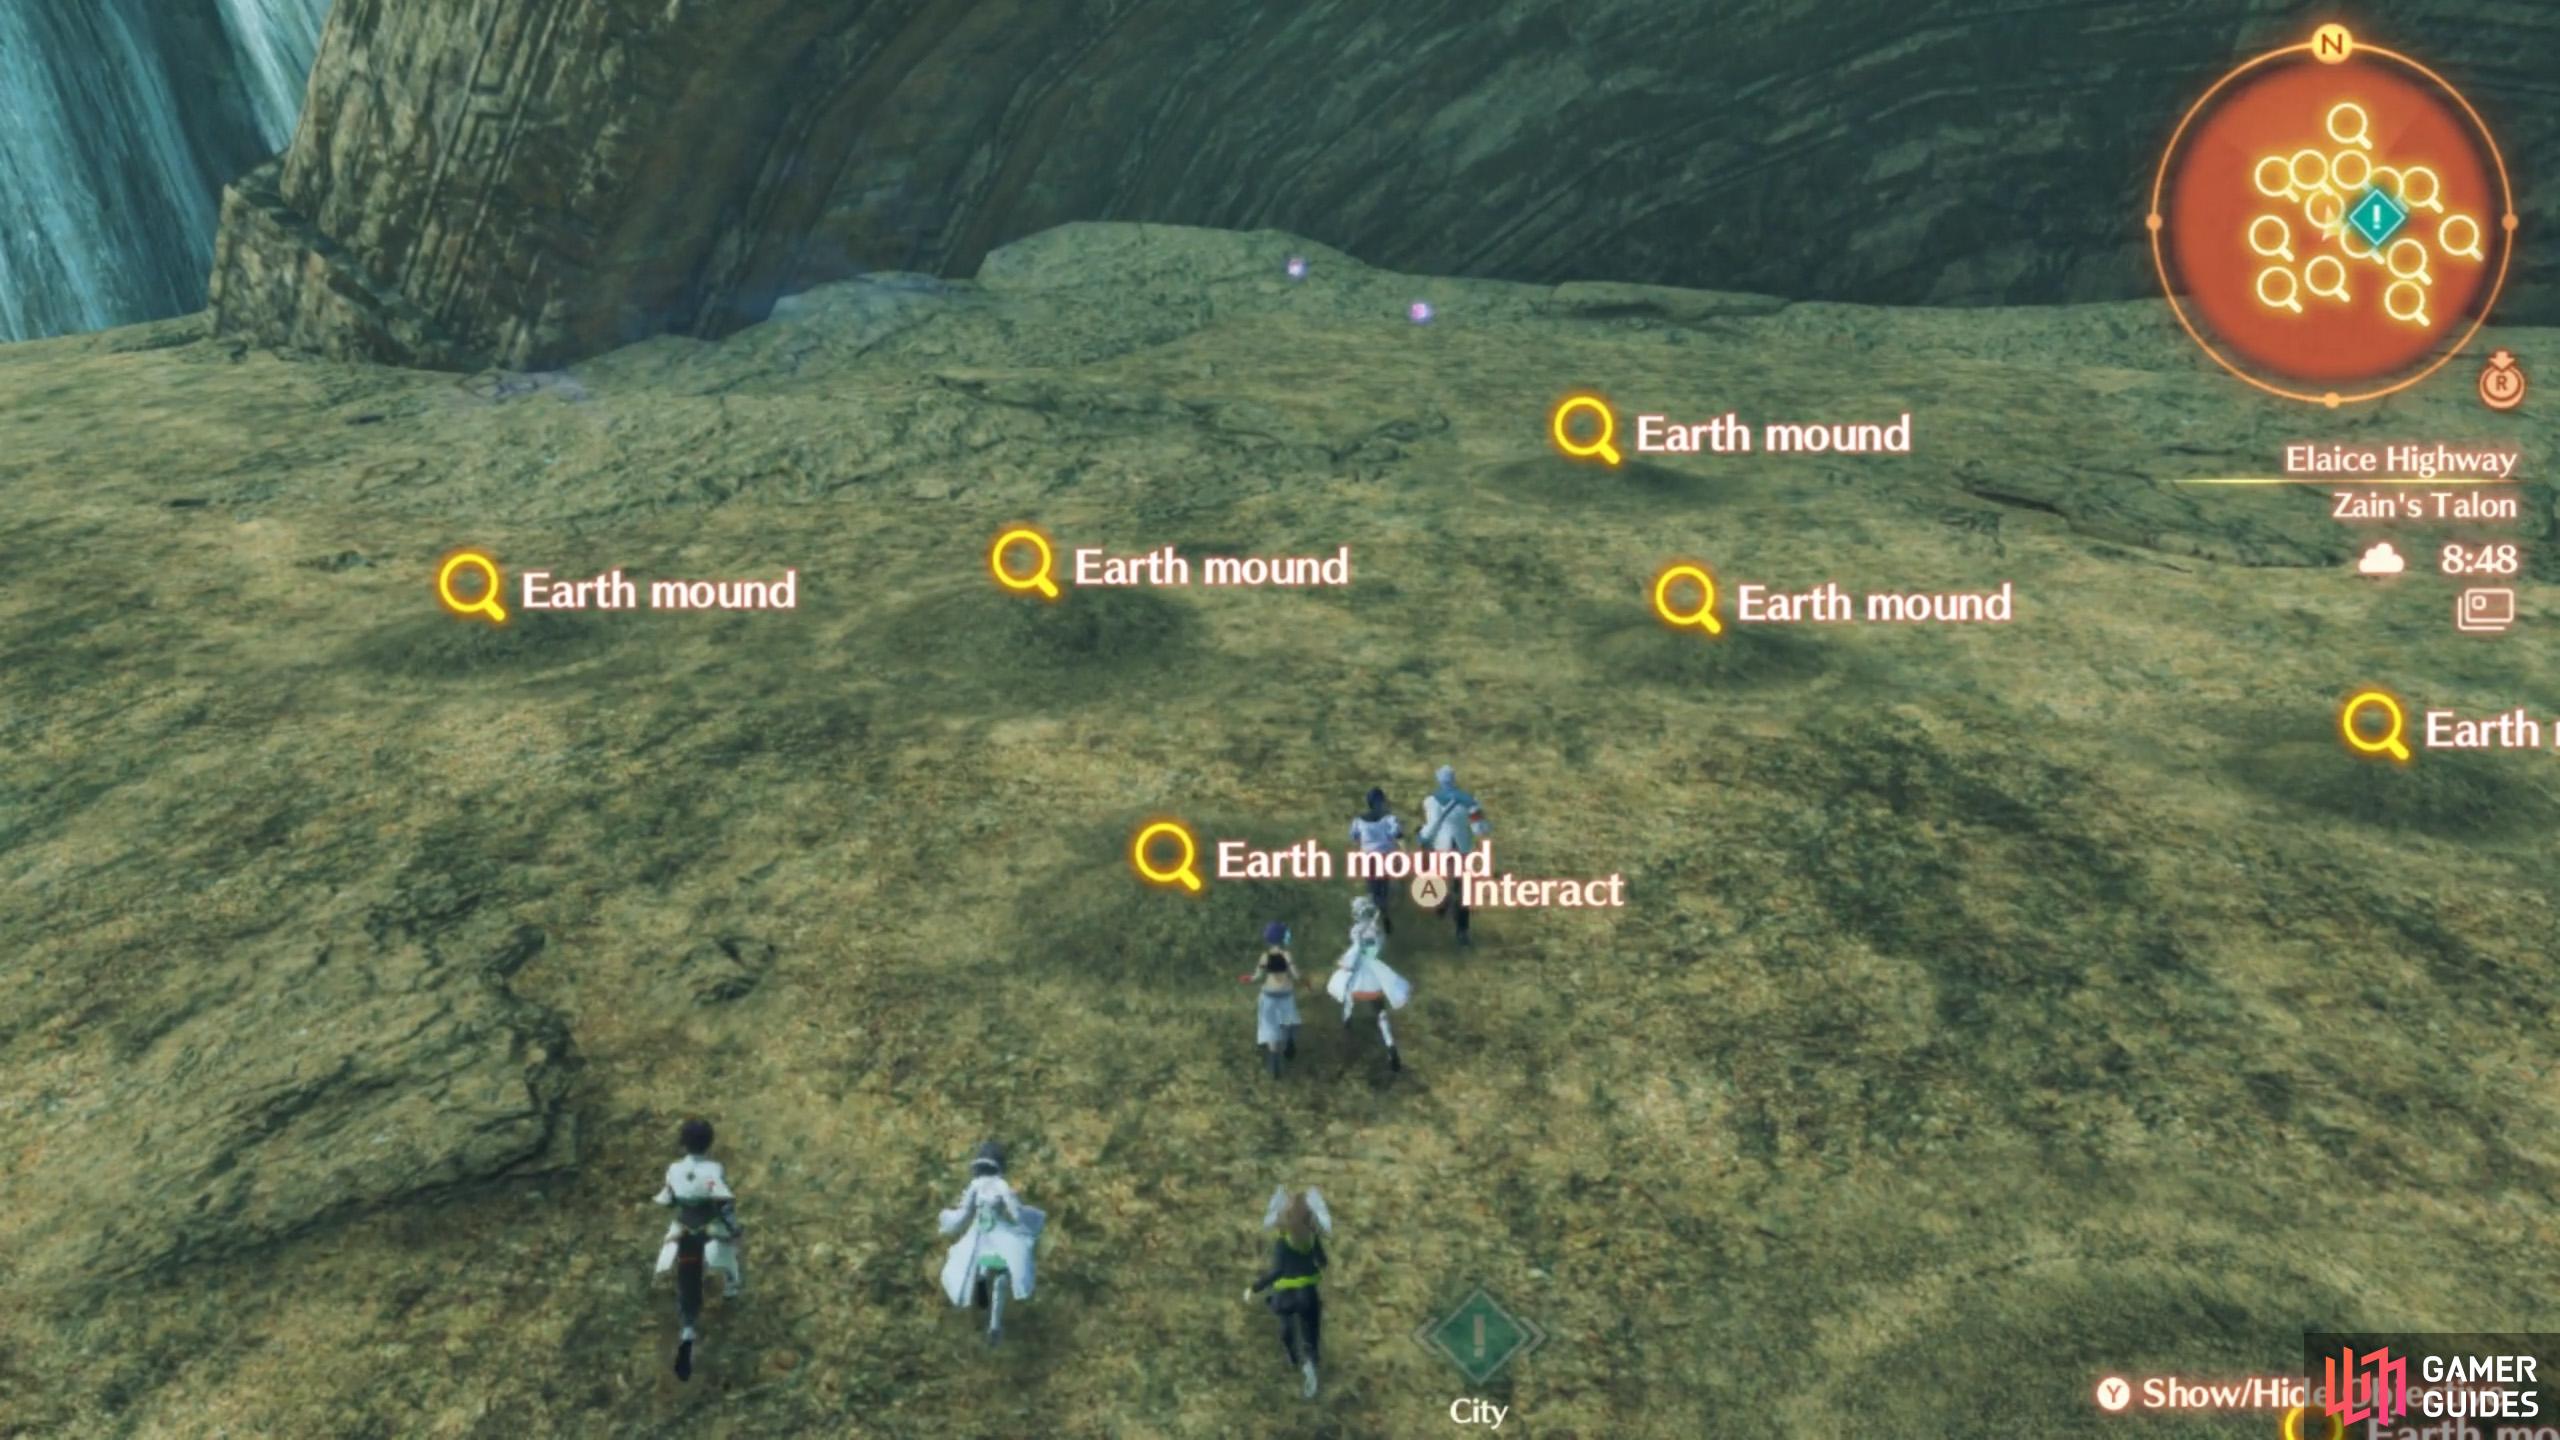 Try searching this earth mound.